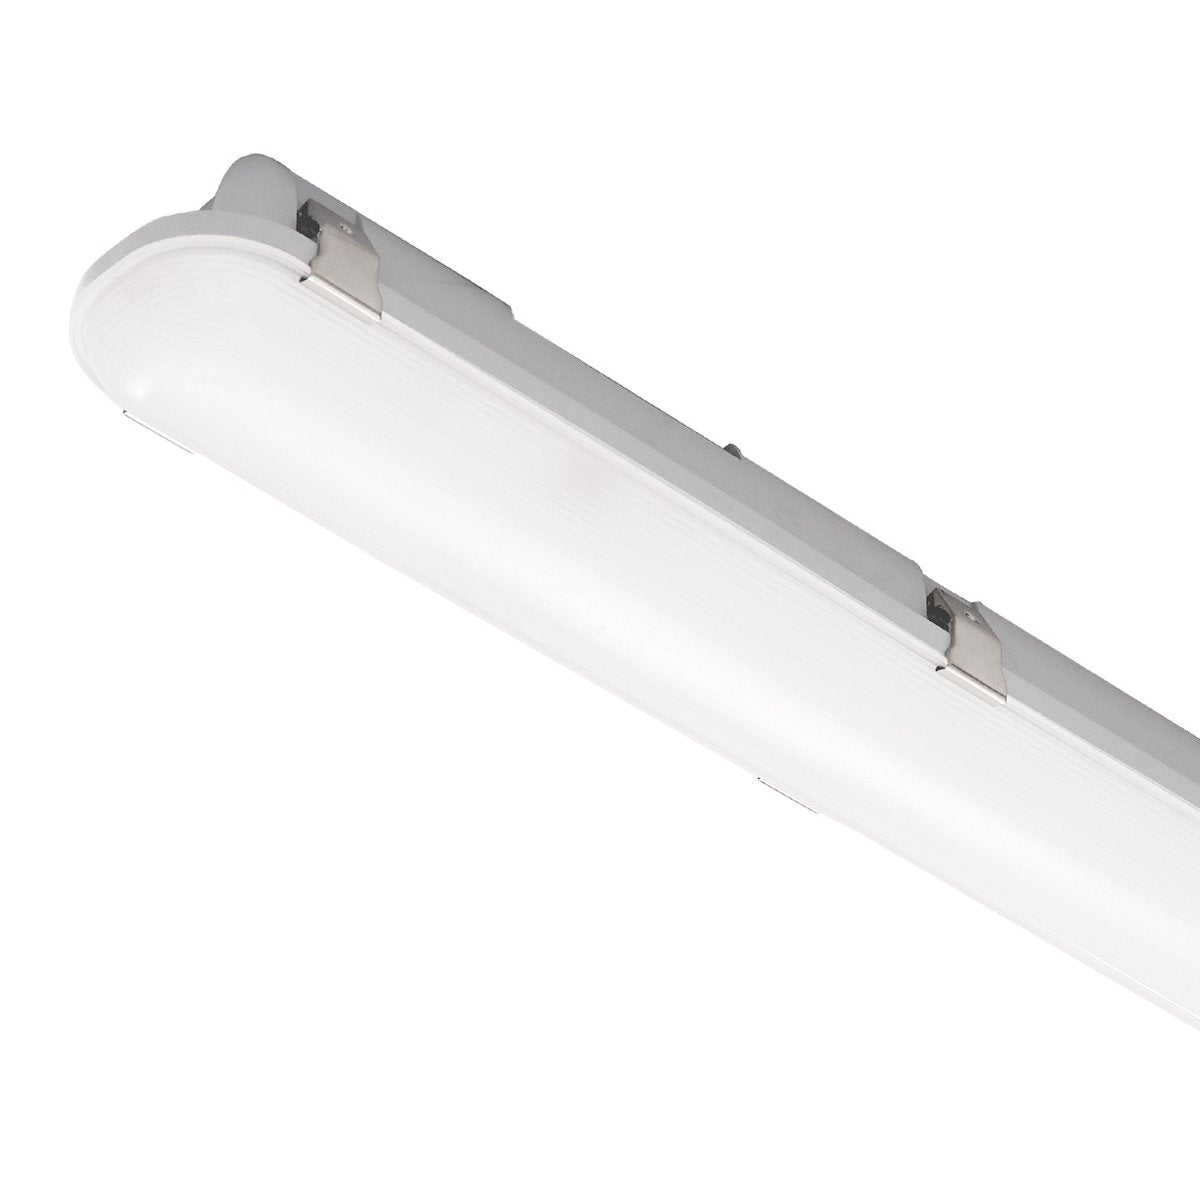 8FT LED Vapor Tight Lighting Fixture, 12150 Lumen Max, Wattage and CCT Selectable, 120-277V